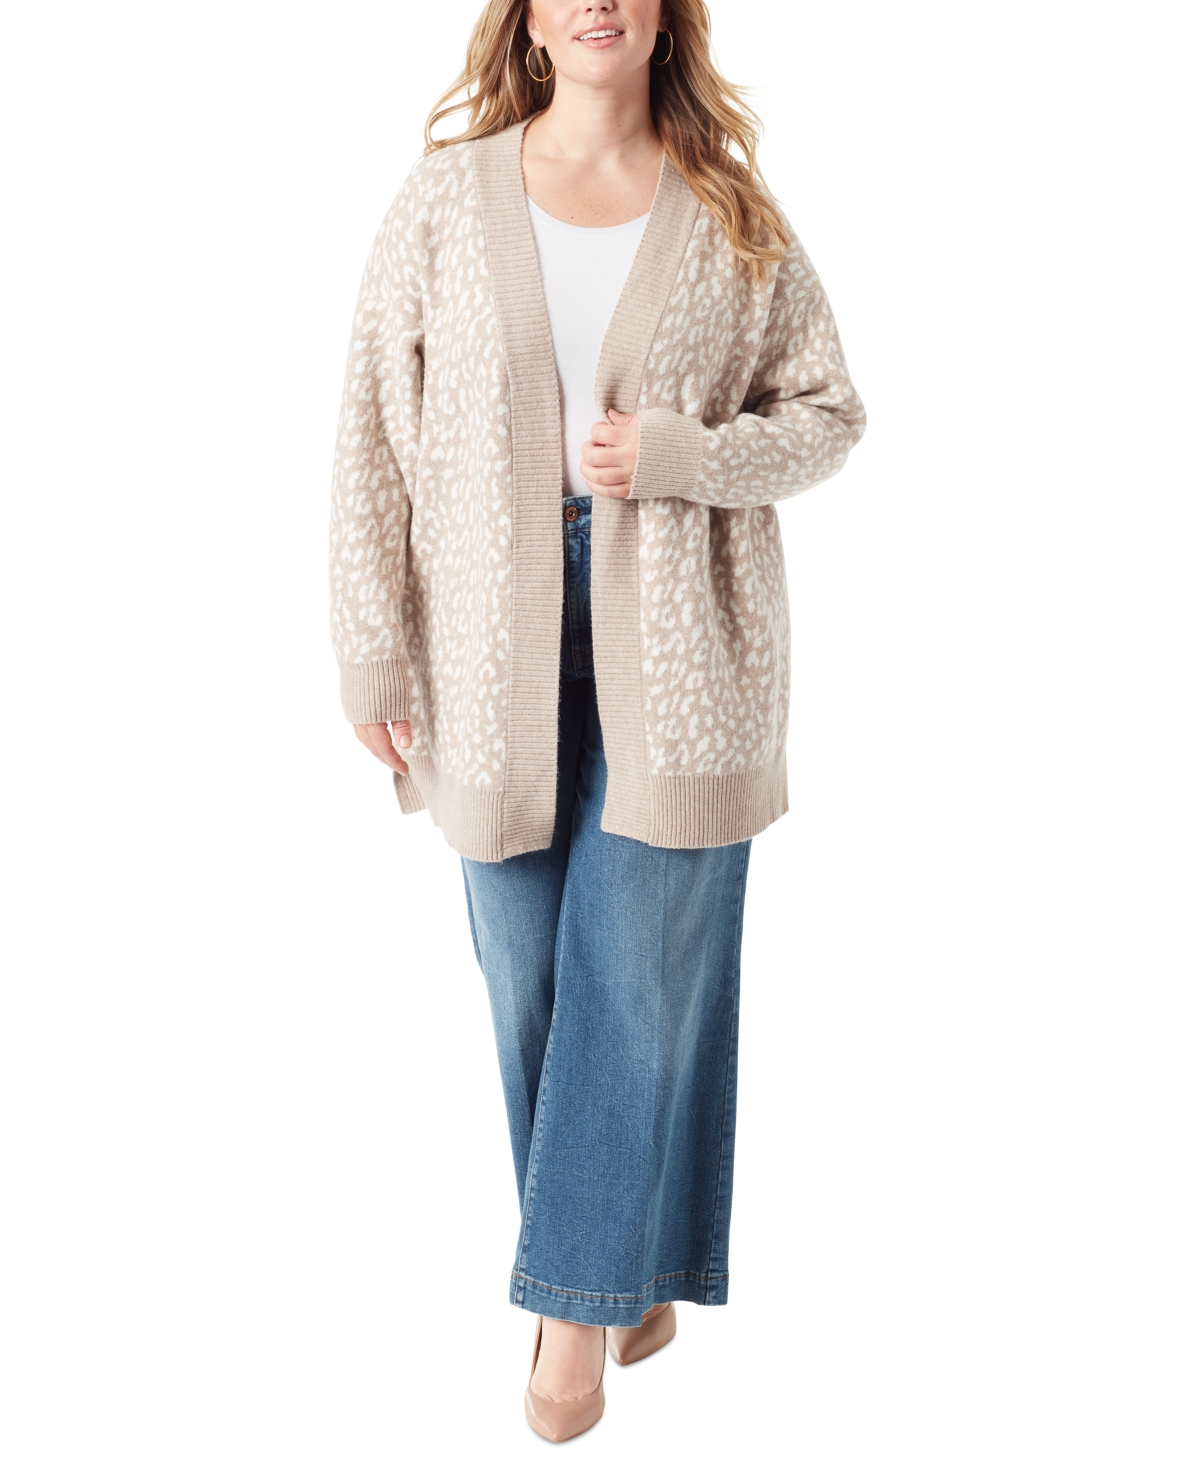 Jessica Simpson Trendy Plus Size Printed Open-front Cardigan In Stucco Scattered Leopard